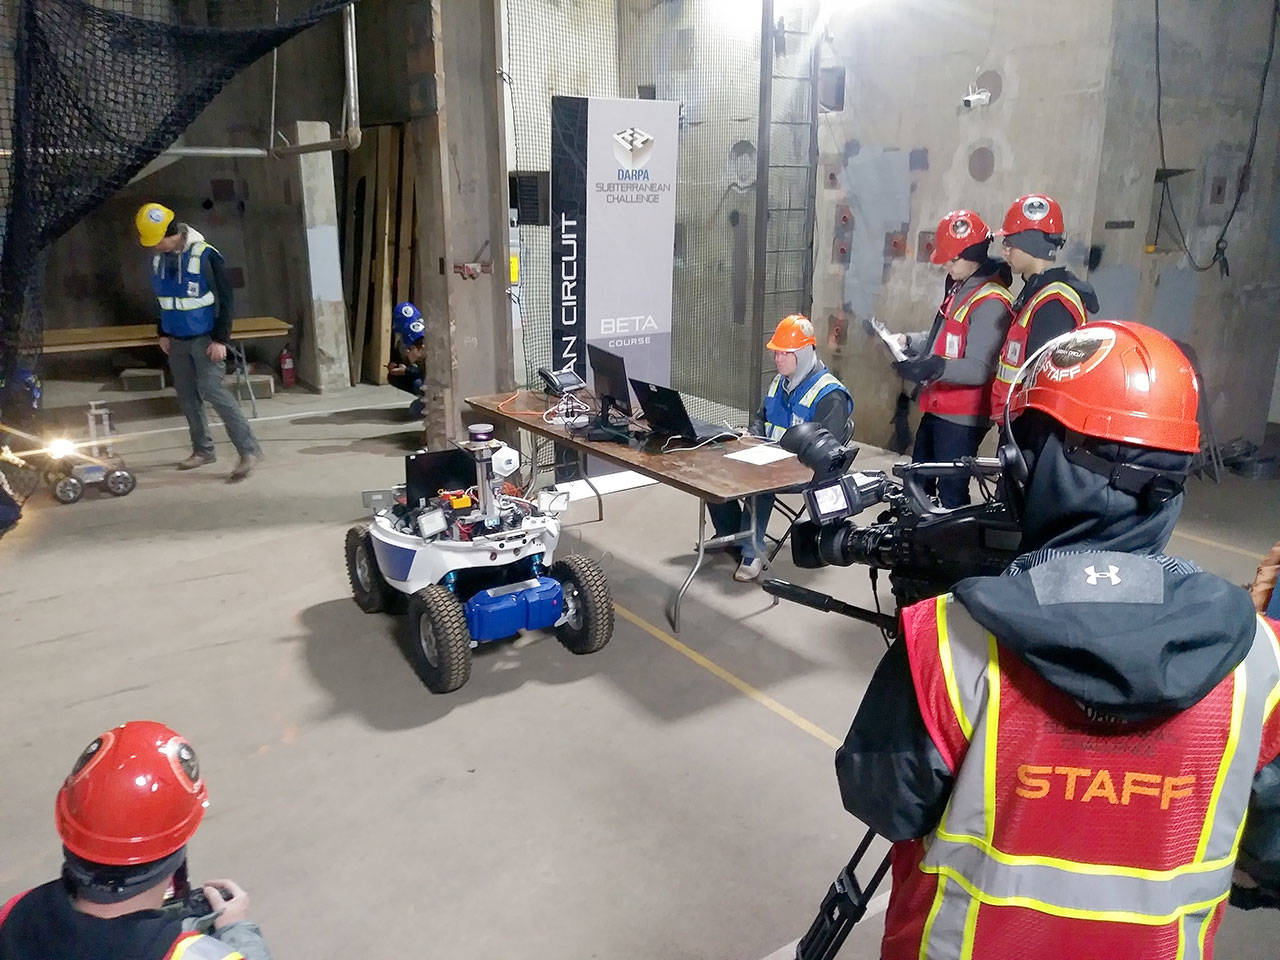 Michael Lang | Grays Harbor News Group                                Kevin Knoedler, seated, manages the Coordinated Robotics team’s robots as they make their way into and through the Beta Course on Monday during the DARPA Subterranean Challenge at the Satsop Business Park in Elma.